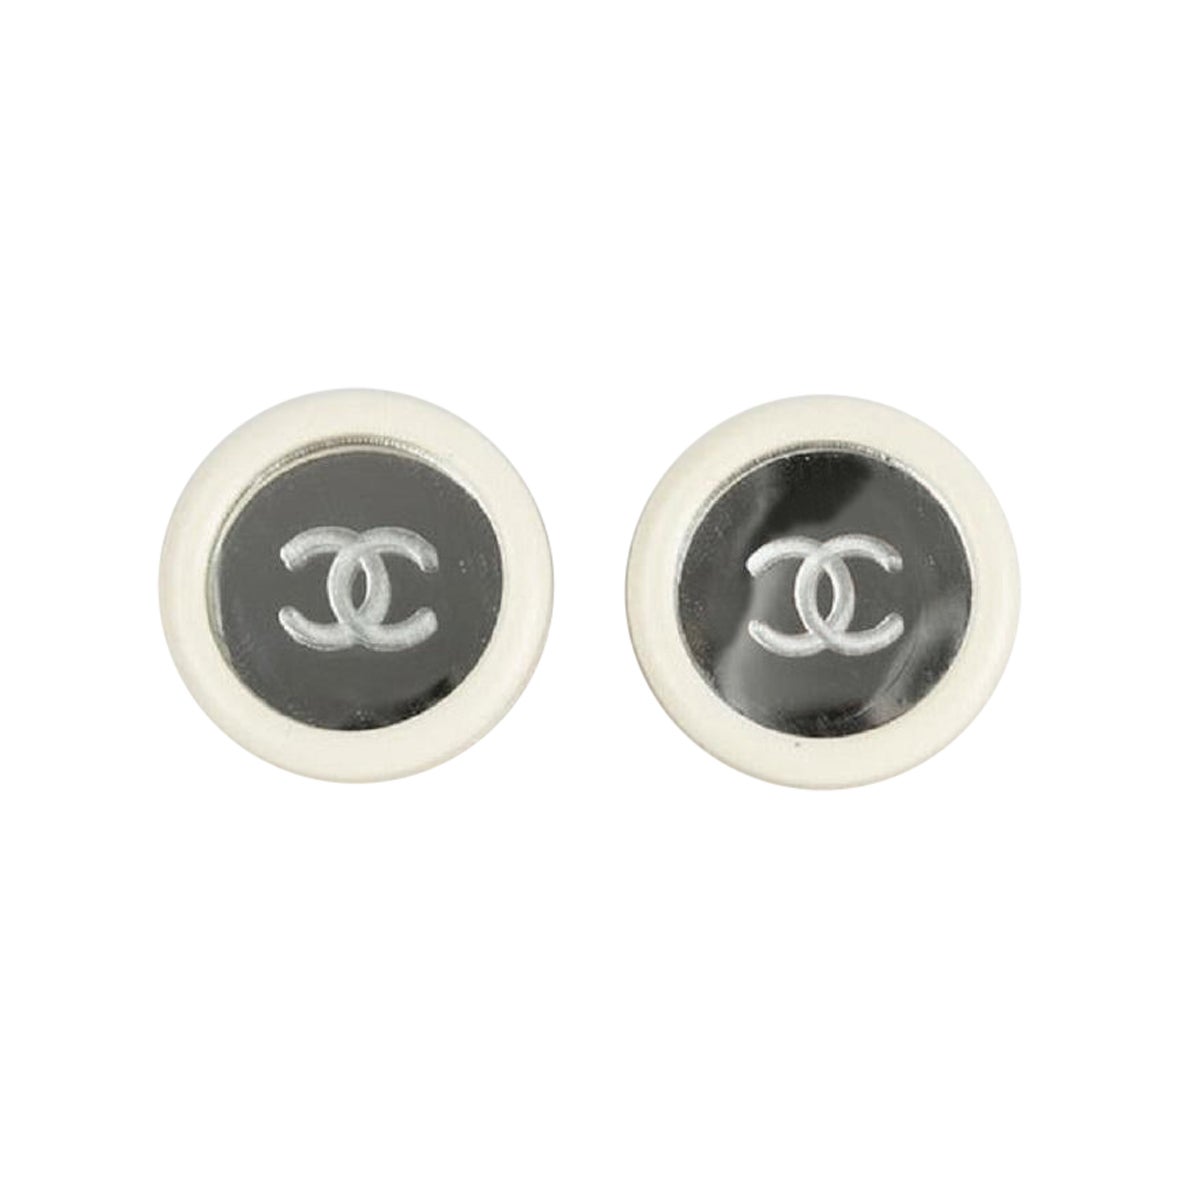 Chanel Earrings in White Resin and Mirror Engraved with a CC Logo, 1995 For Sale